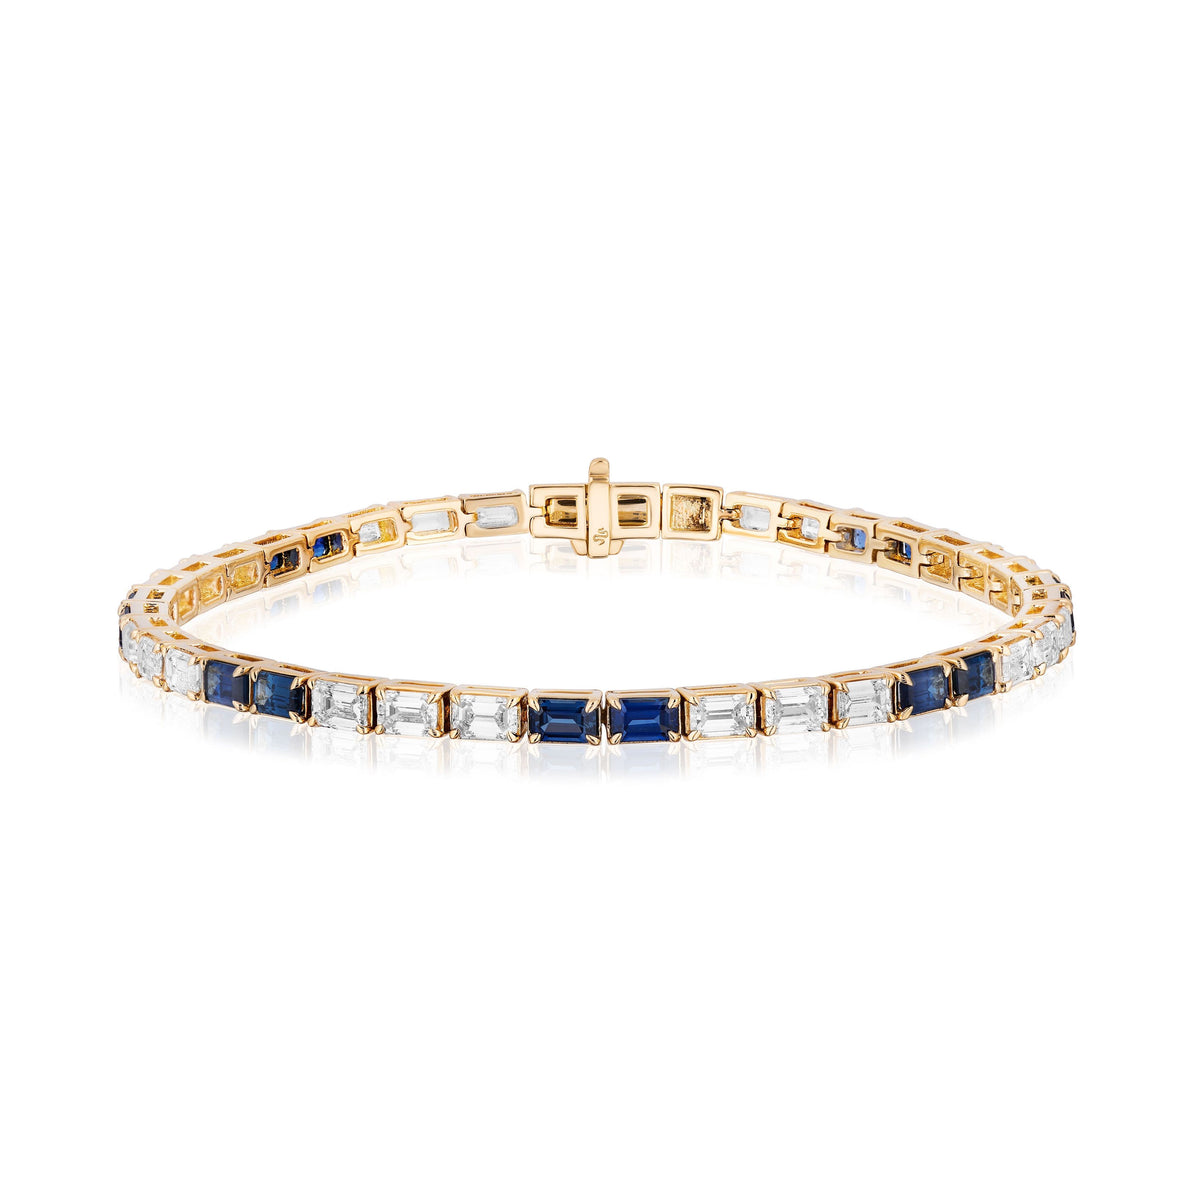 East West Diamond and Sapphire Tennis Bracelet in Yellow Gold